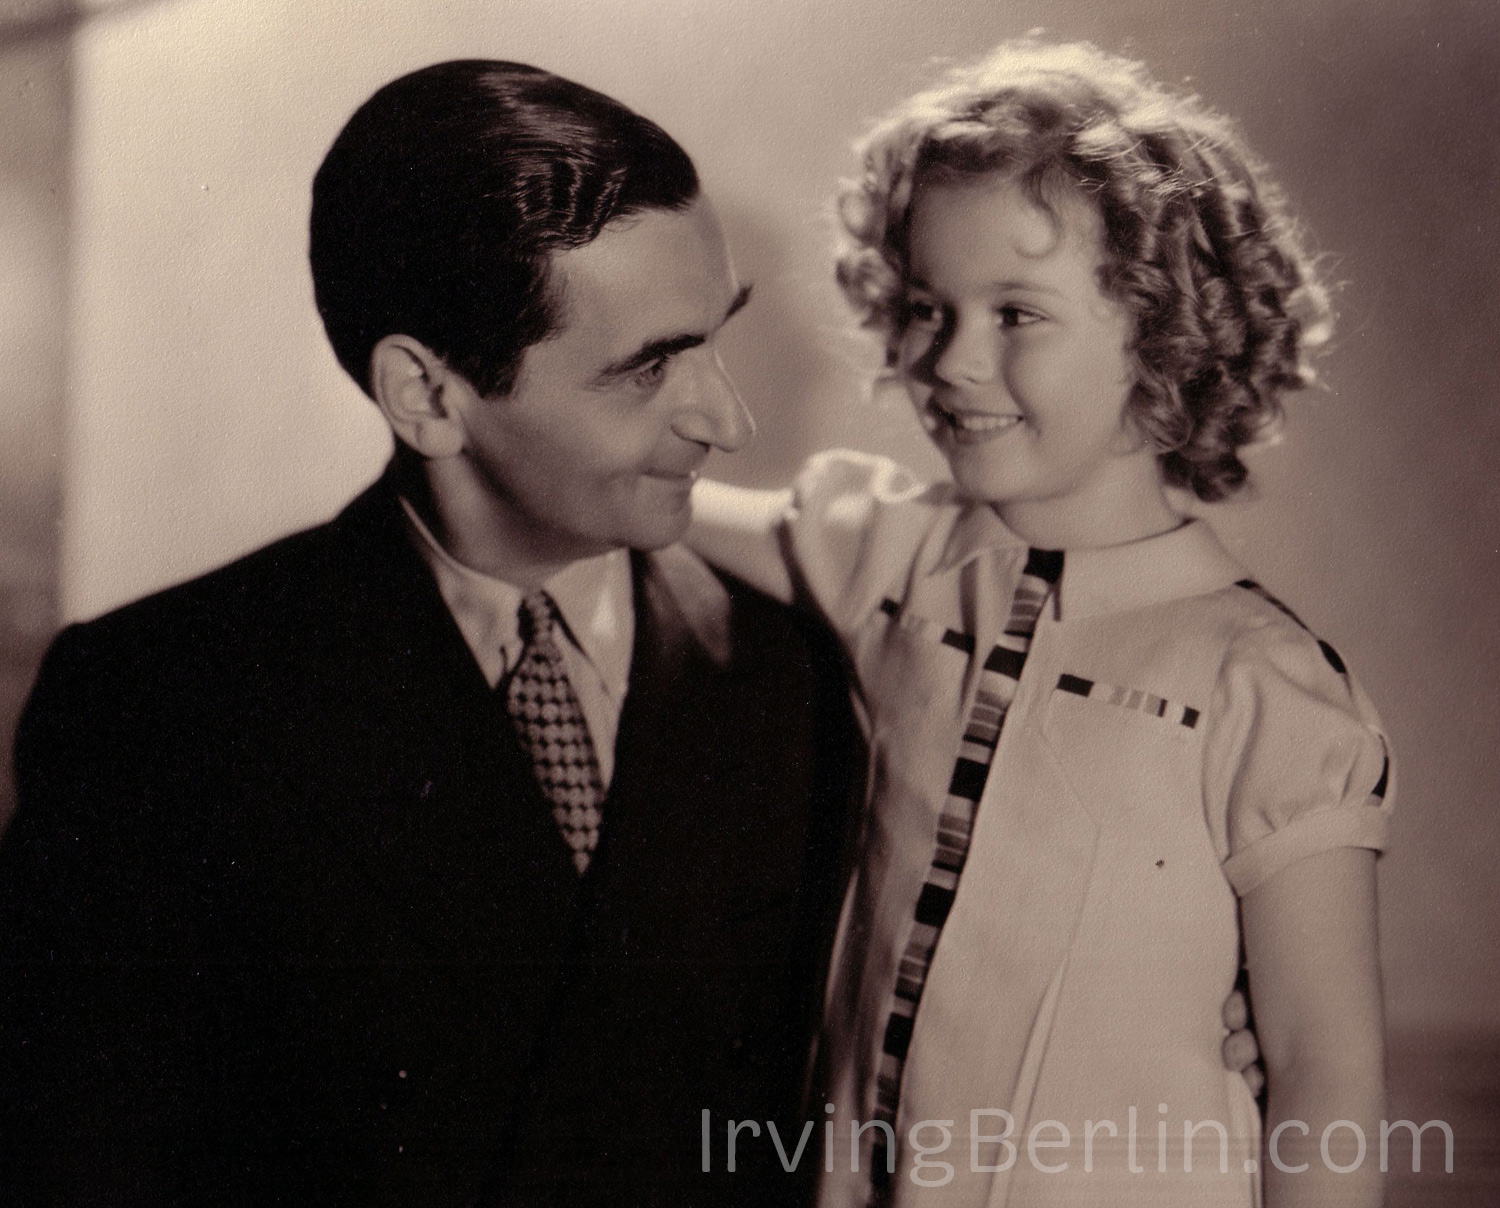  Irving Berlin with Shirley Temple 